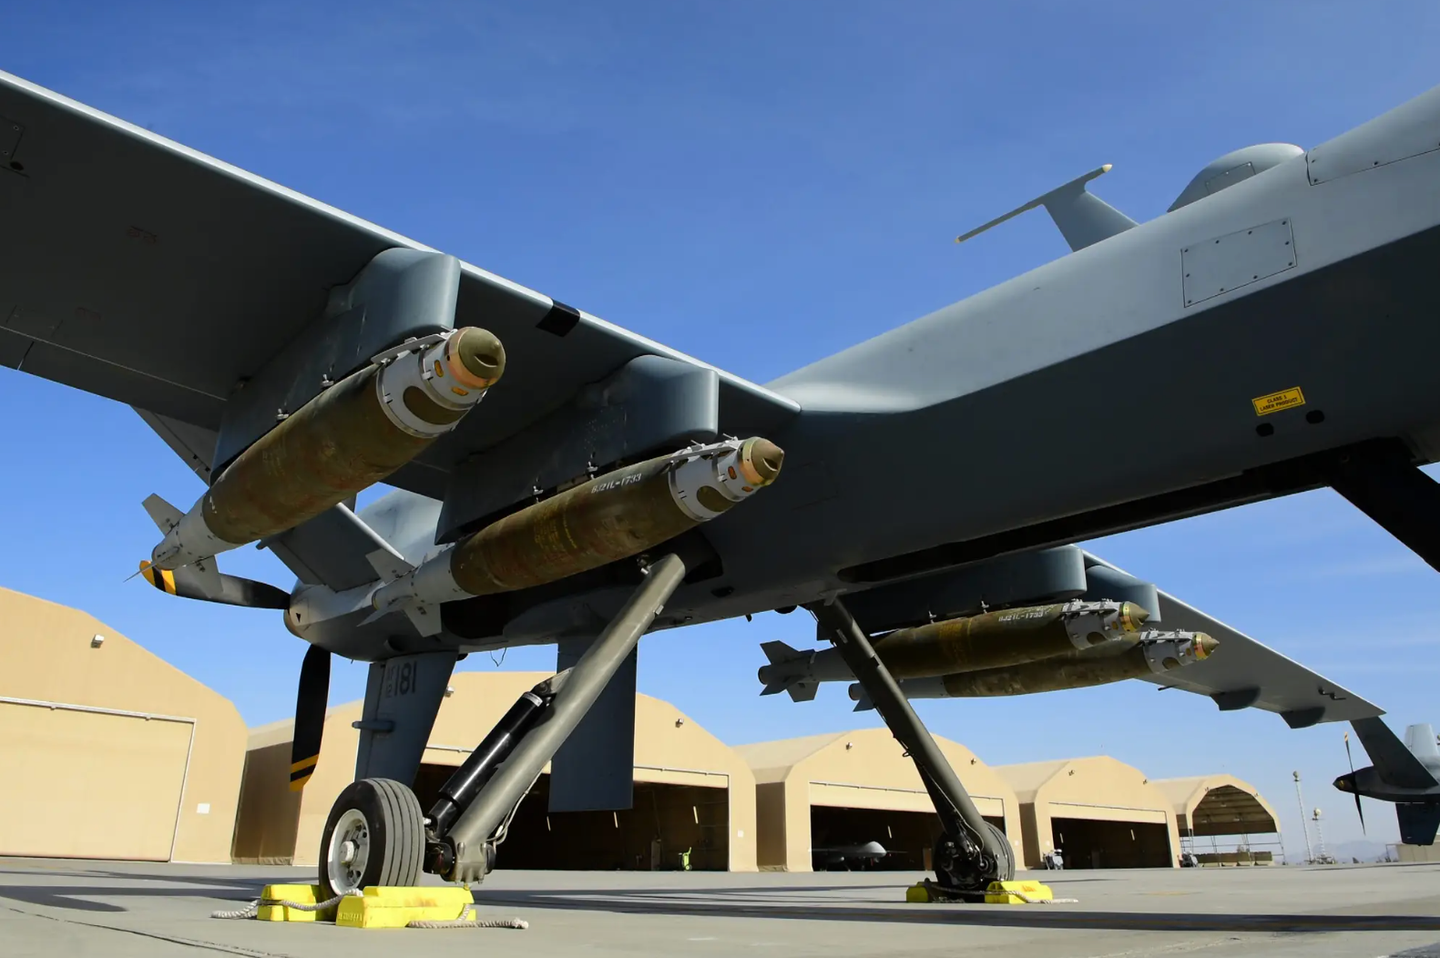 A U.S. Air Force MQ-9 Reaper, assigned to the 62nd Expeditionary Reconnaissance Squadron, armed with four GBU-38 JDAMs on a flight line at a deployed location.&nbsp;<em>U.S. Air Force Photo by Tech. Sgt. Paul Labbe</em><br>